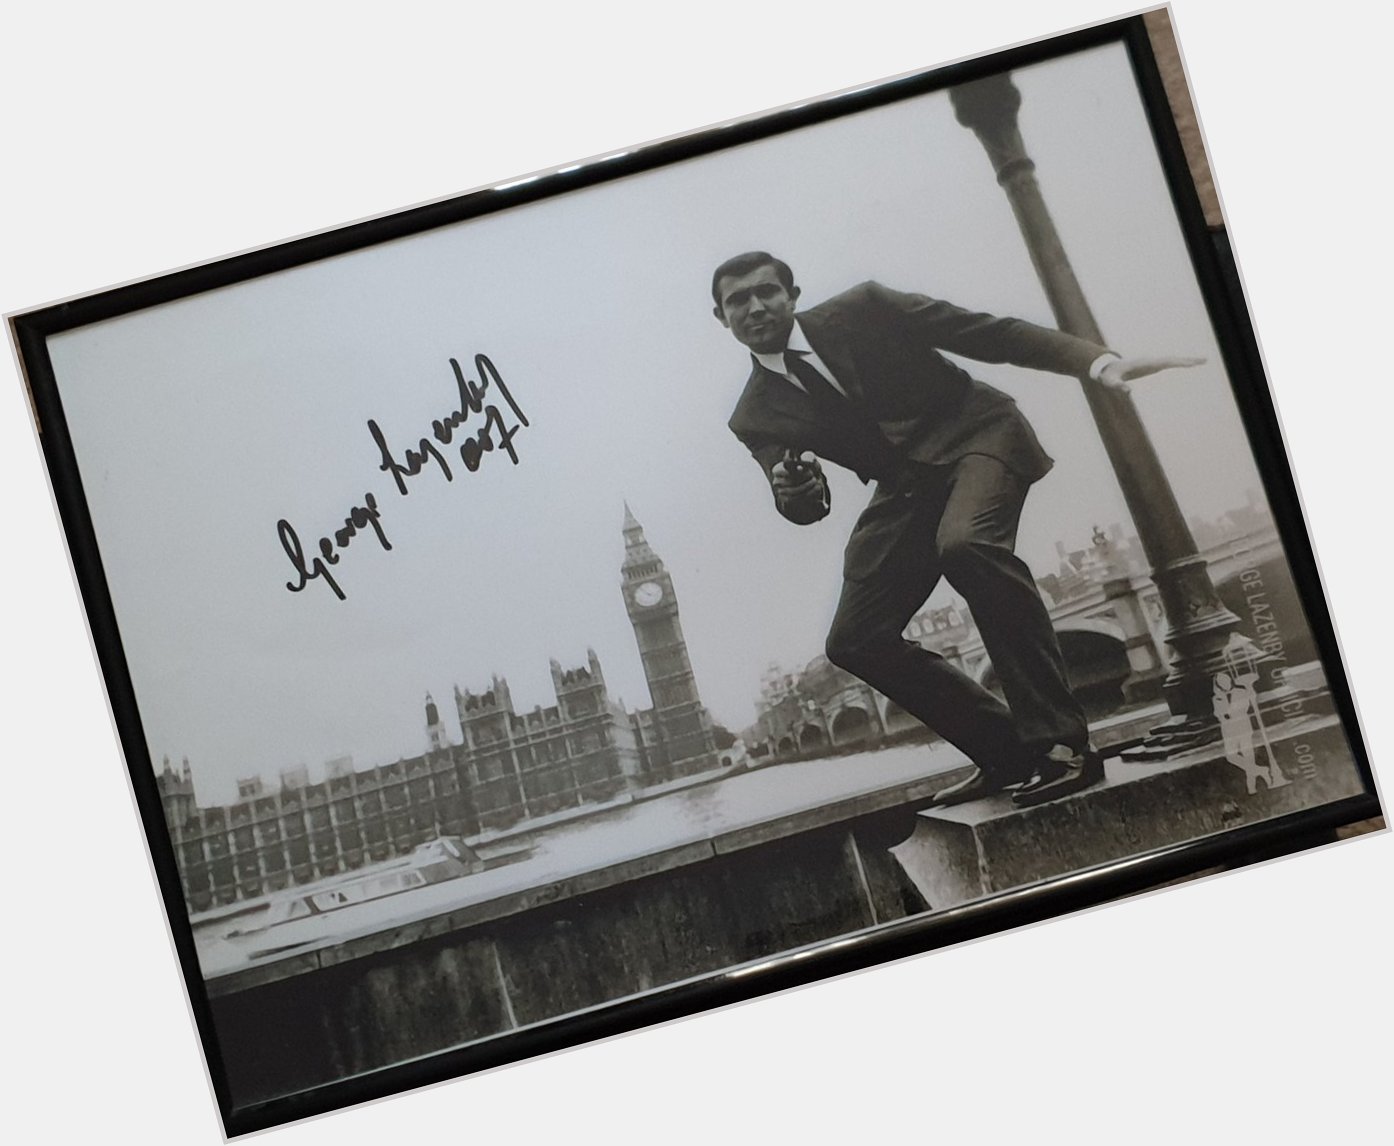 I got this signed photo from George Lazenby\s site. I enlarged it and framed it. Happy birthday George! 